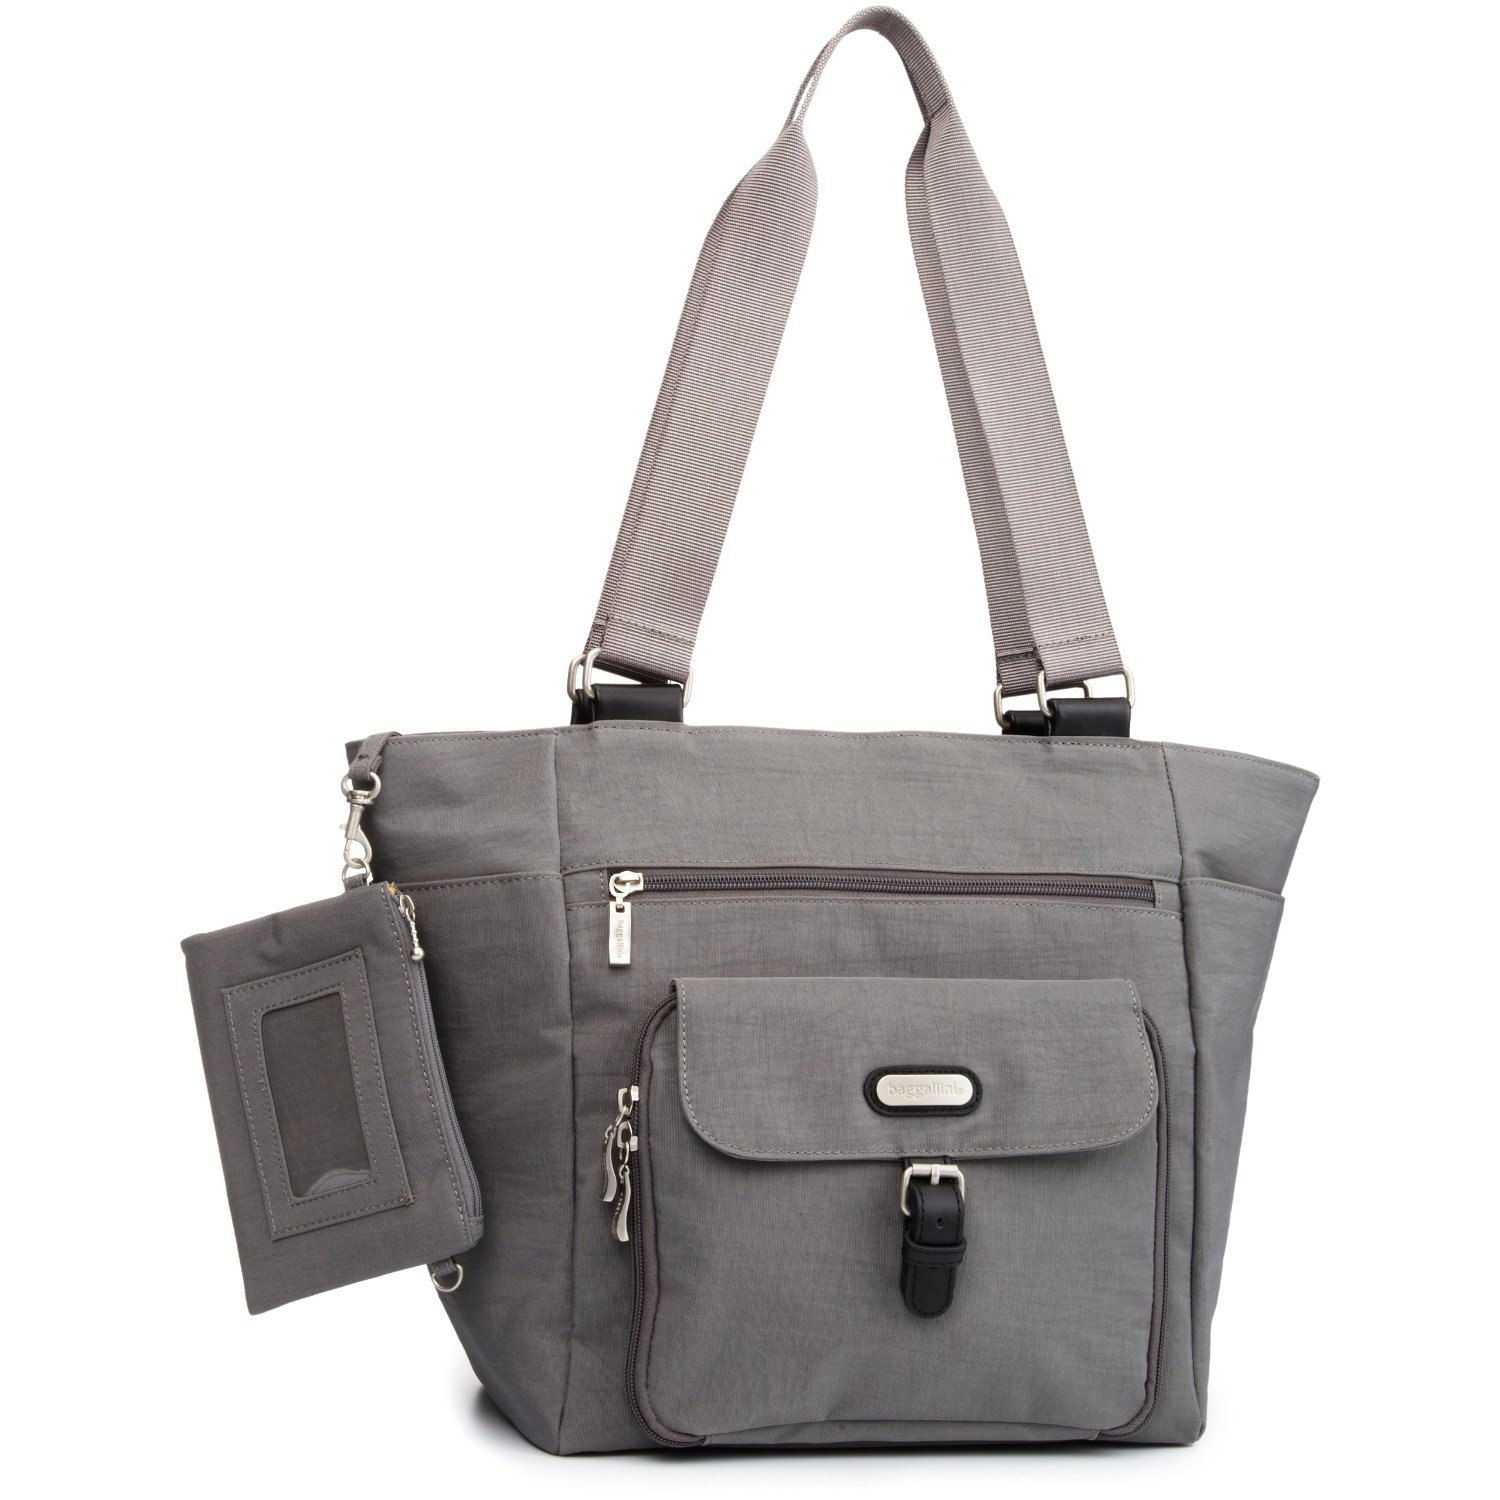 Baggallini Town Bag. Baggallini Town Bagg Special Edition Crossbody ...